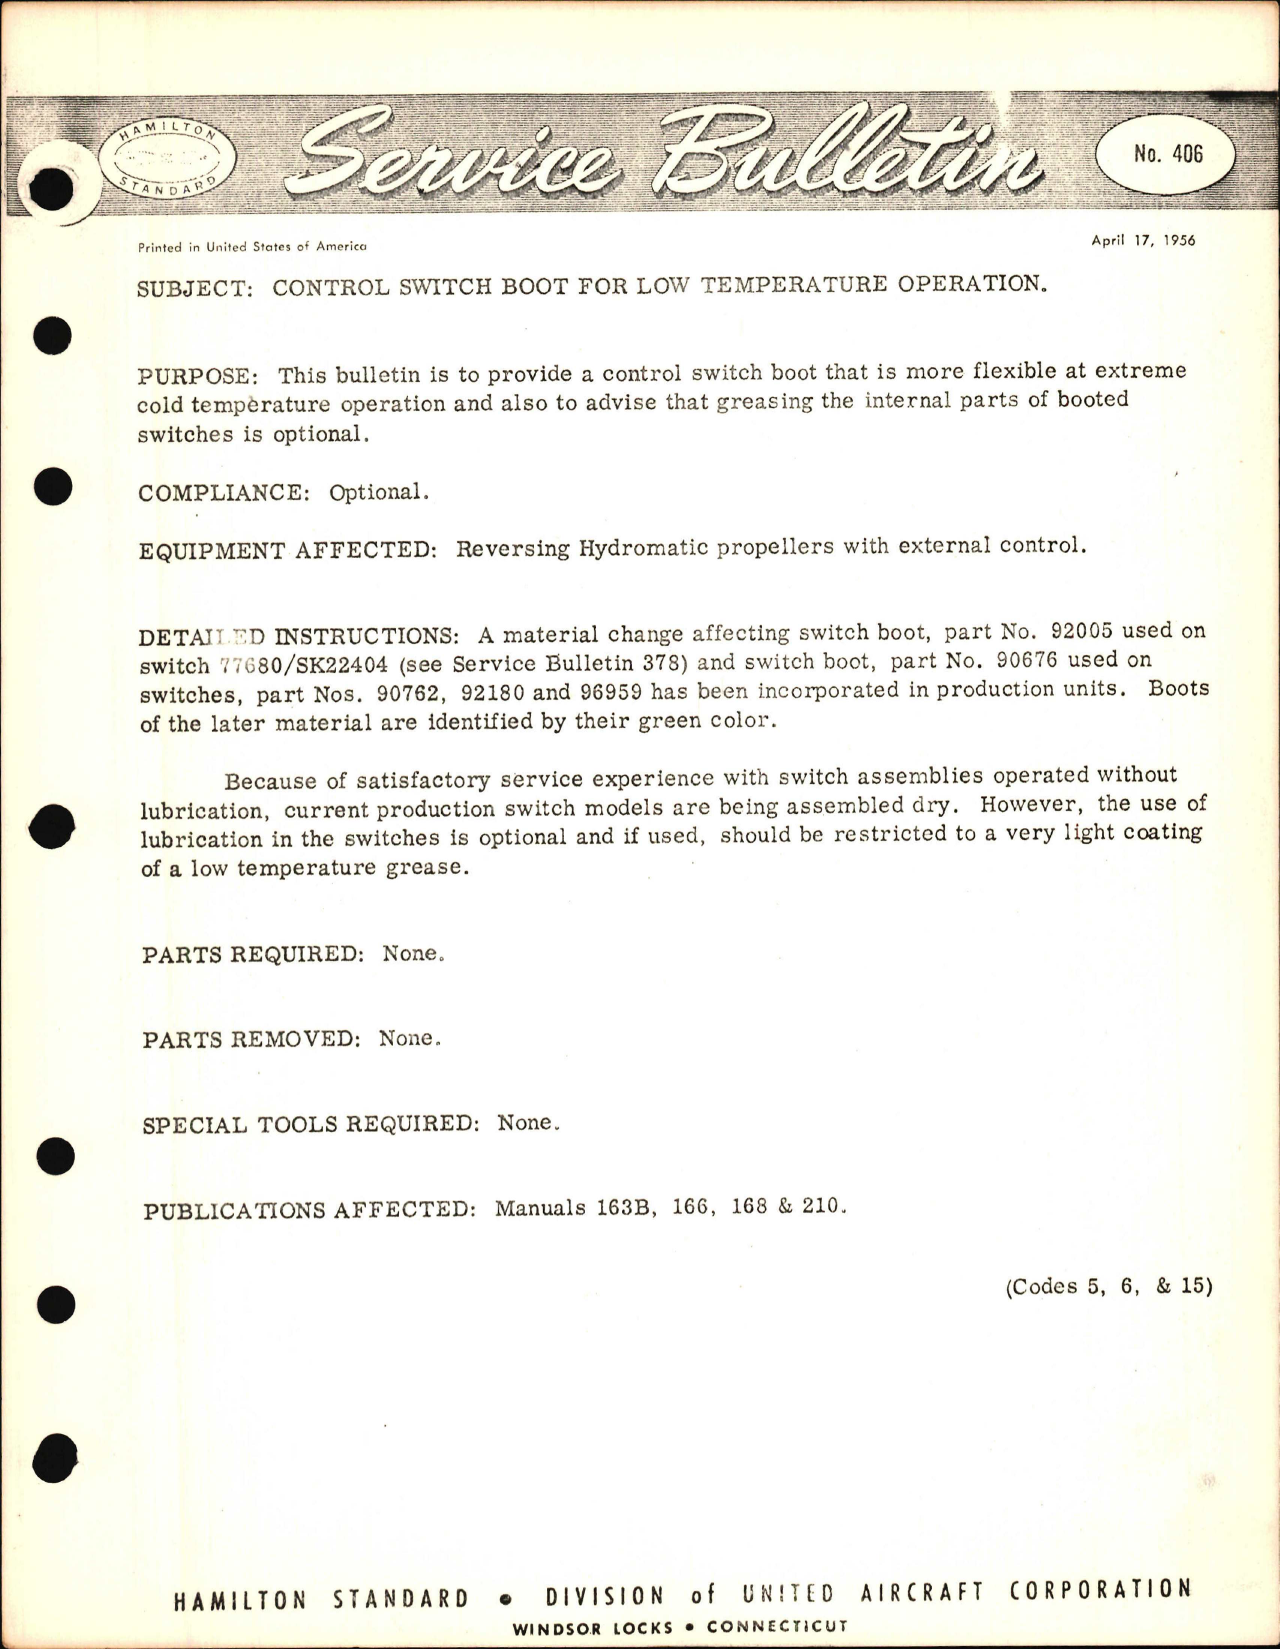 Sample page 1 from AirCorps Library document: Control Switch Boot for Low Temperature Operation